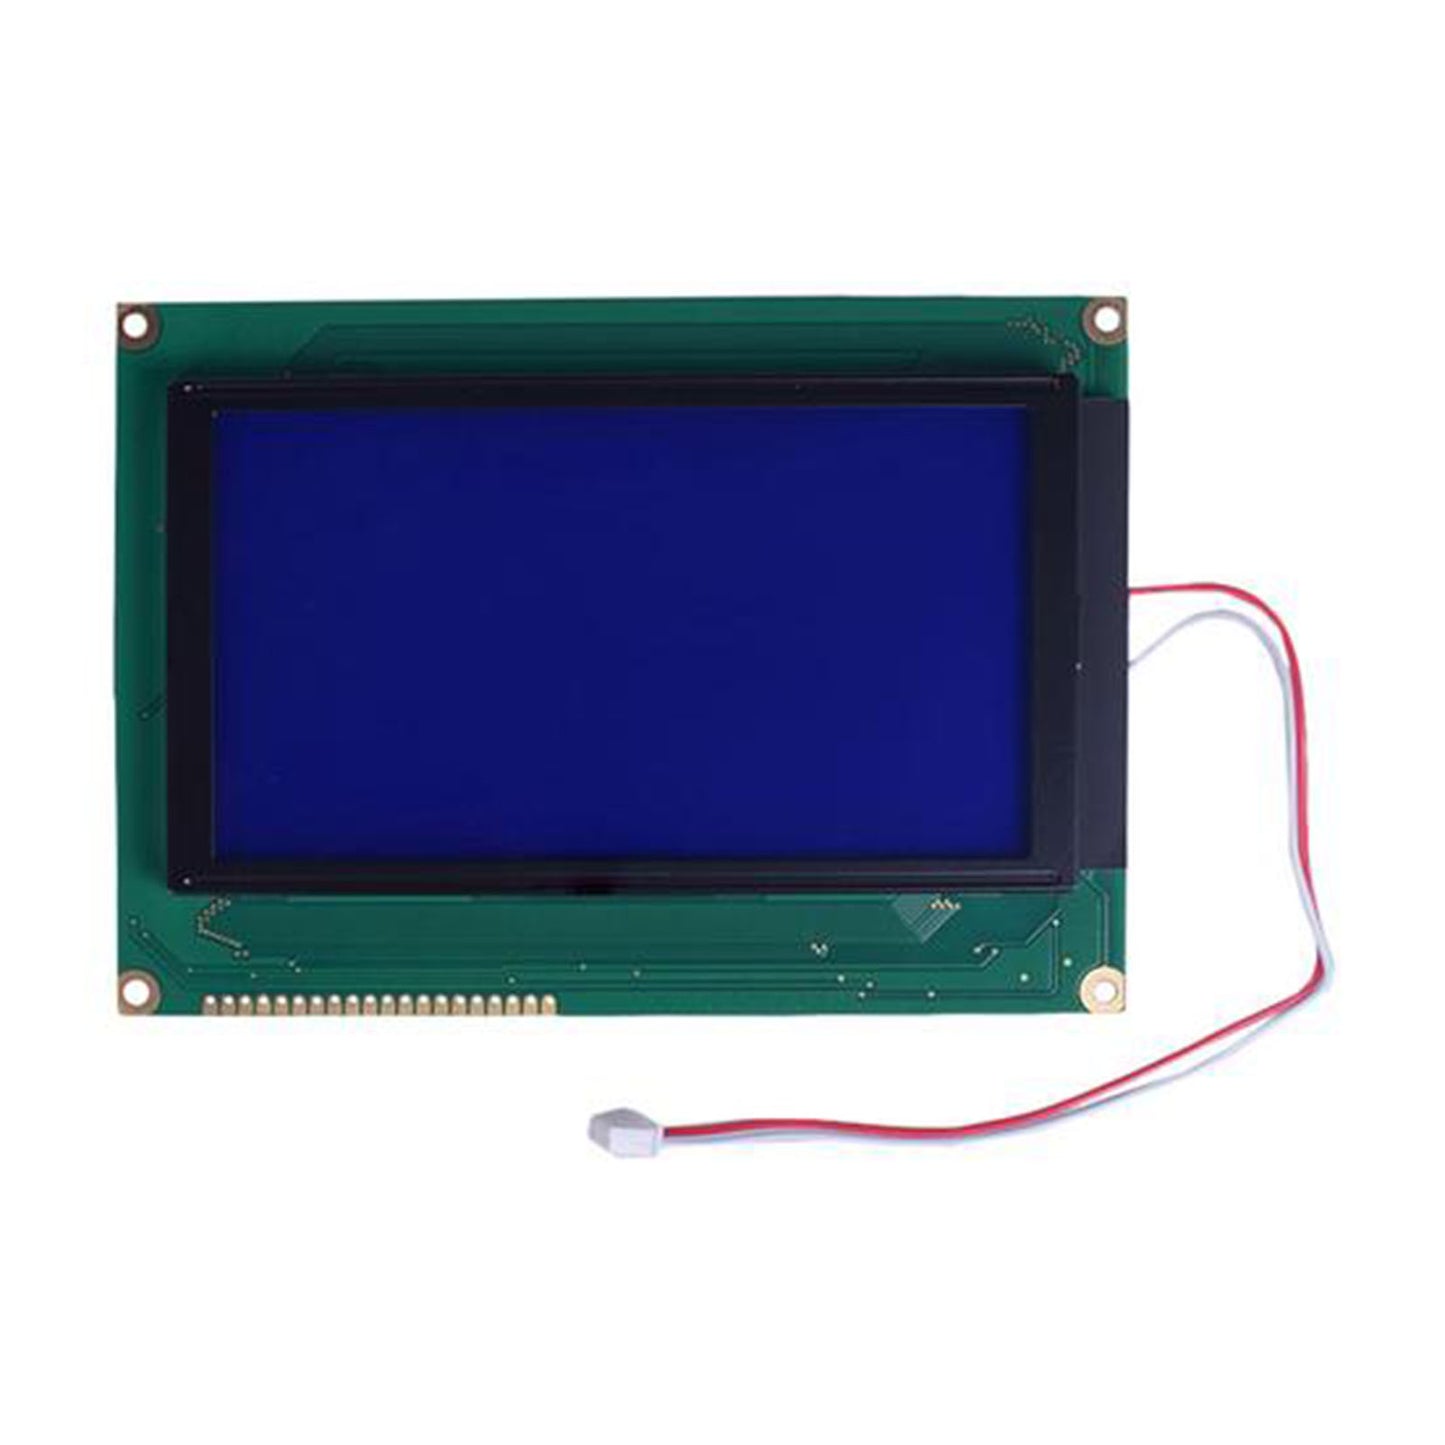 5.15-inch 240x128 Graphic Blue LCD display module with MCU interface